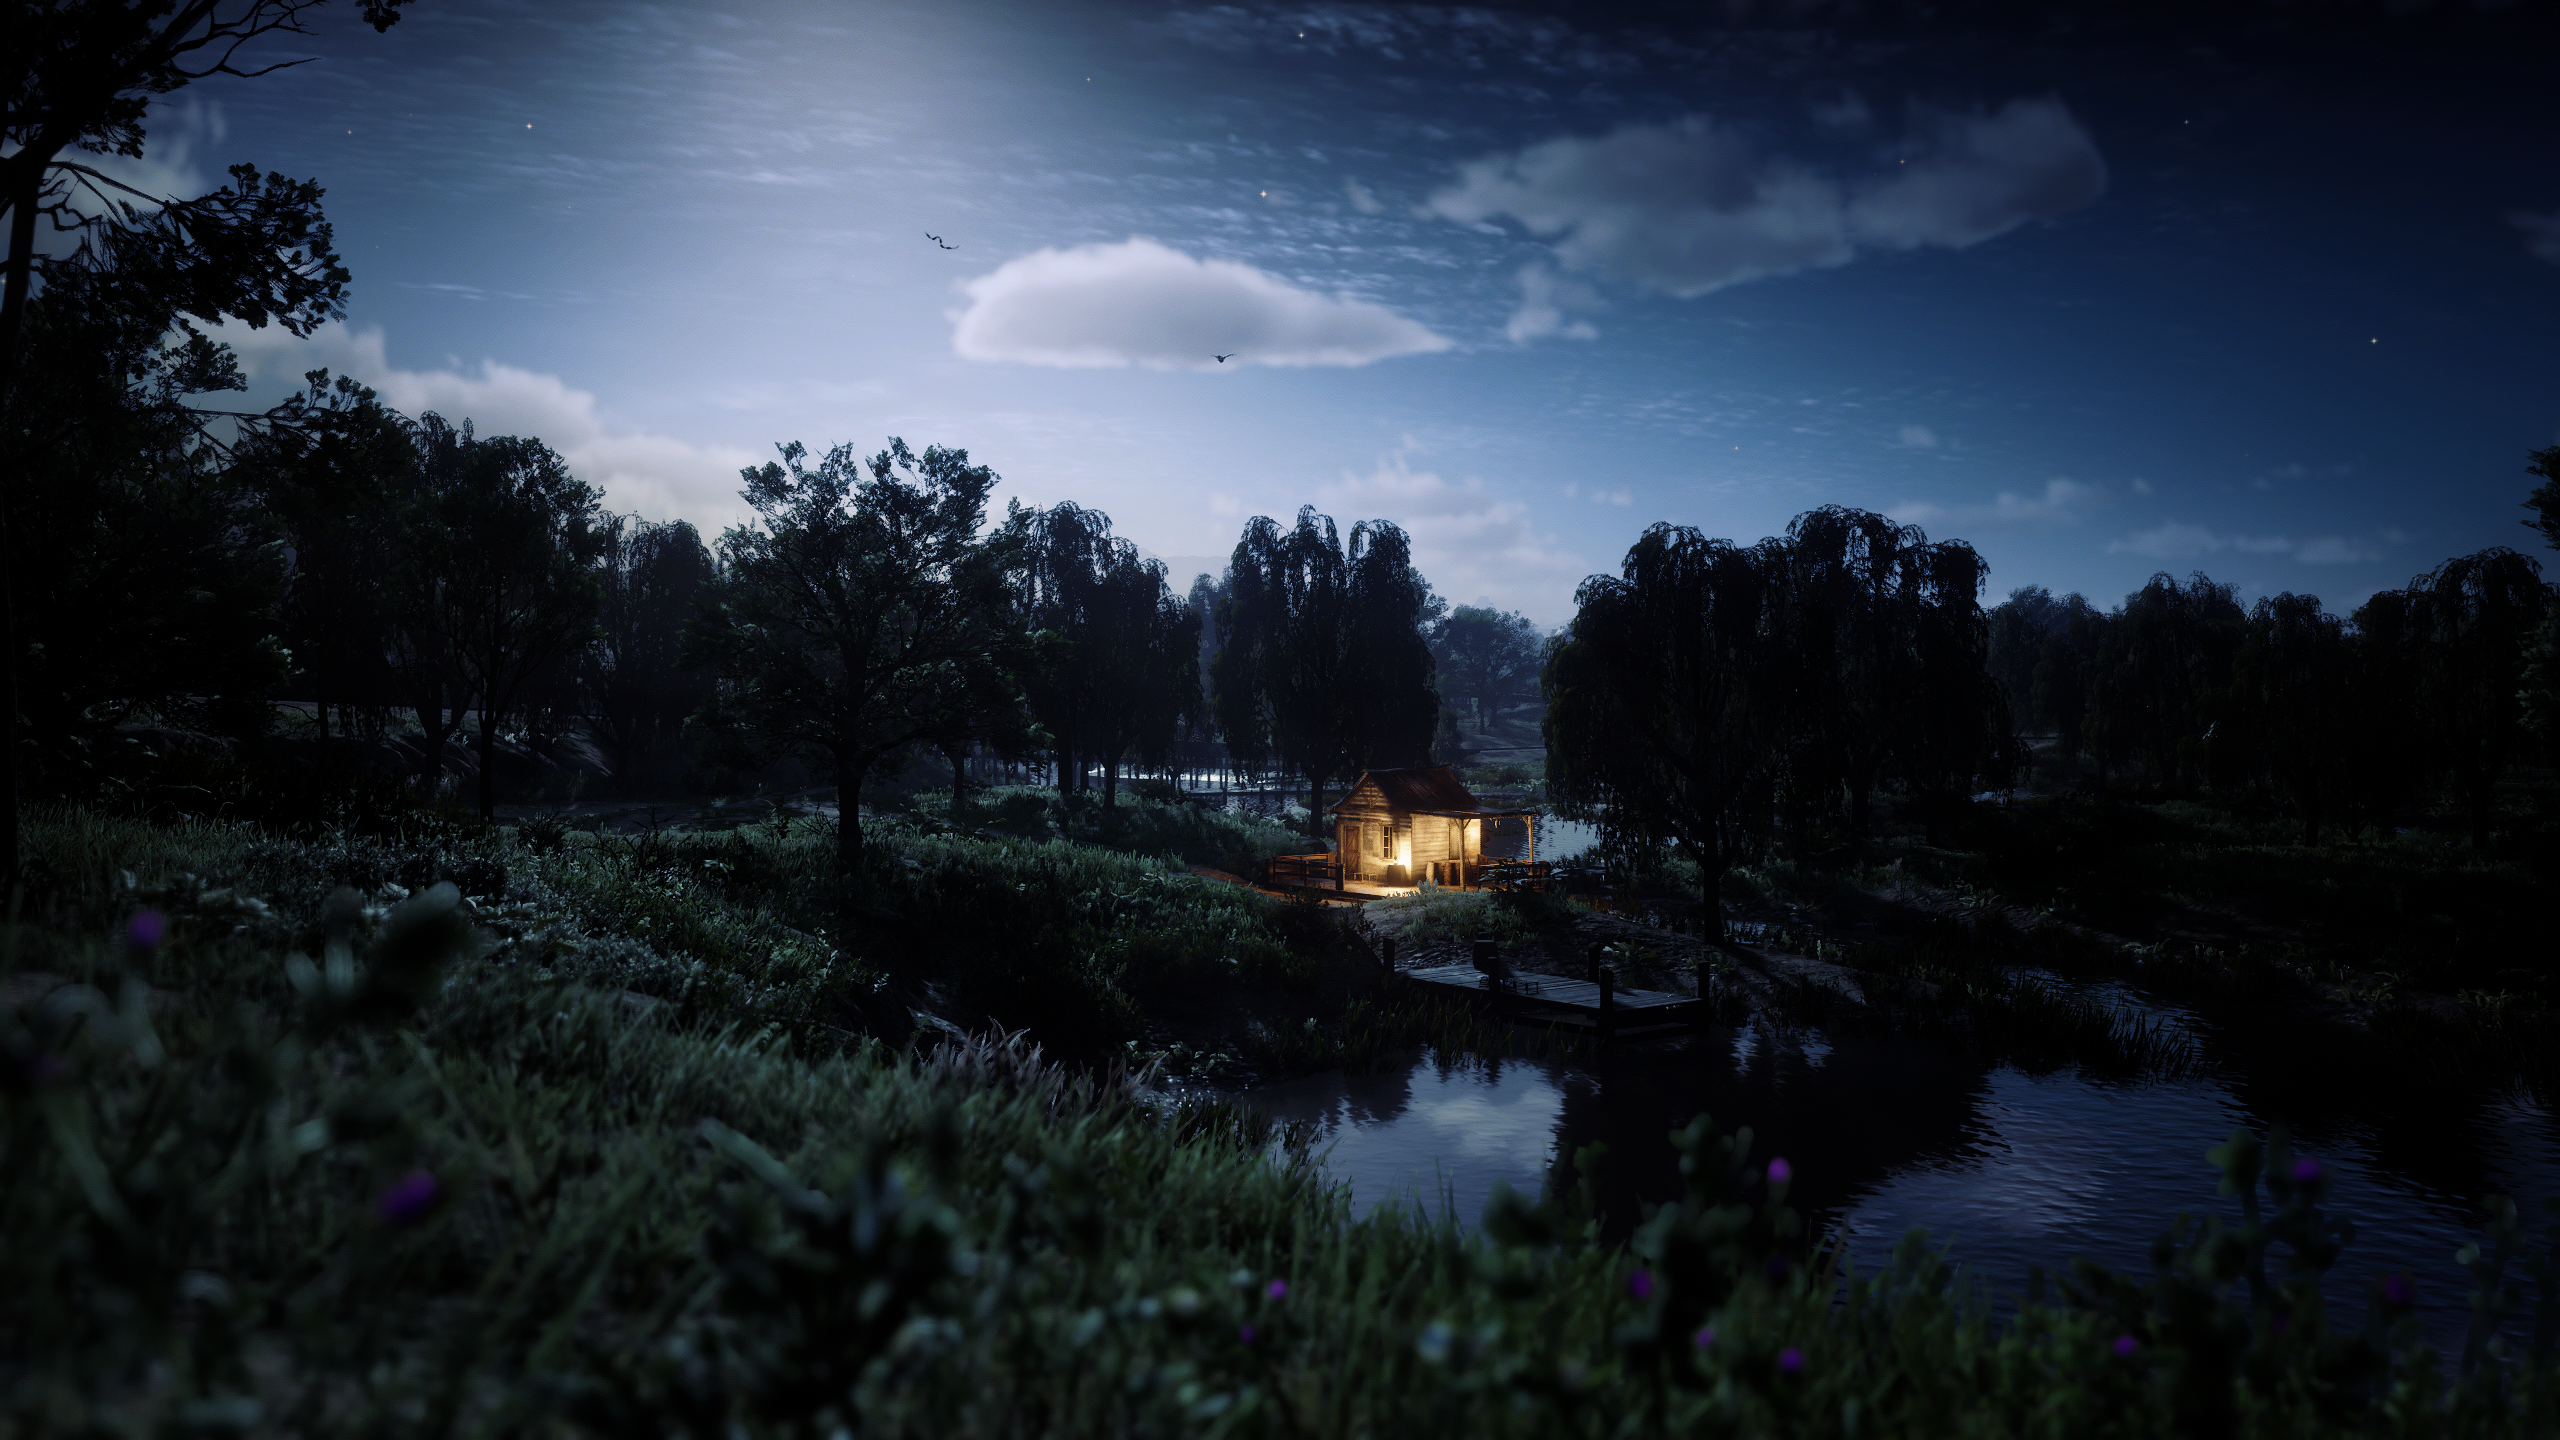 General 2560x1440 cabin forest nature CGI digital art night river moonlight sky Red Dead Redemption 2 water video game art video games reflection clouds trees